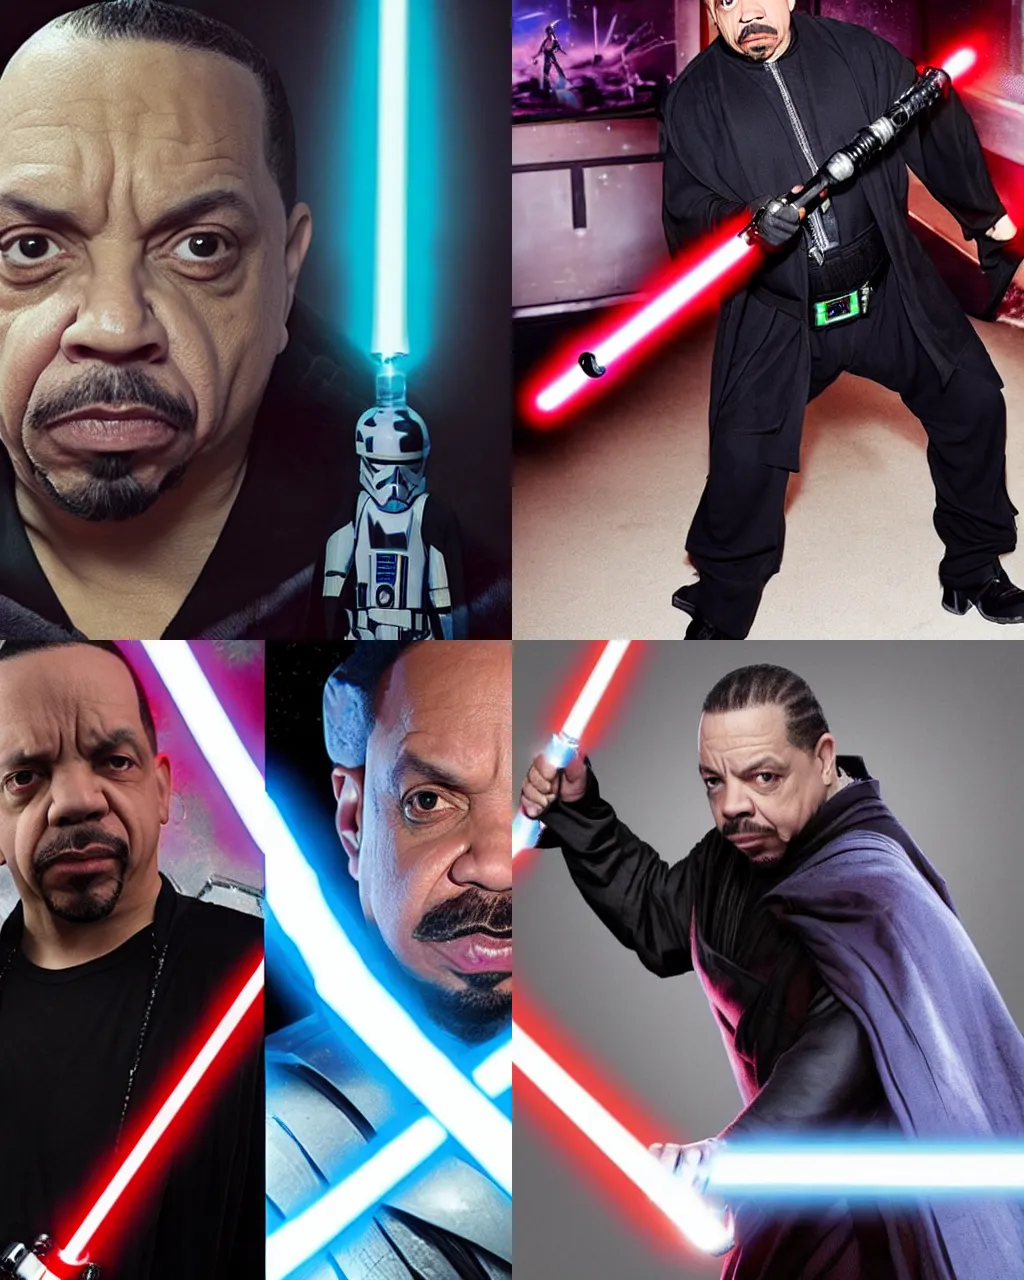 Prompt: ice t as a jedi knight, action photo, star wars, lightsaber